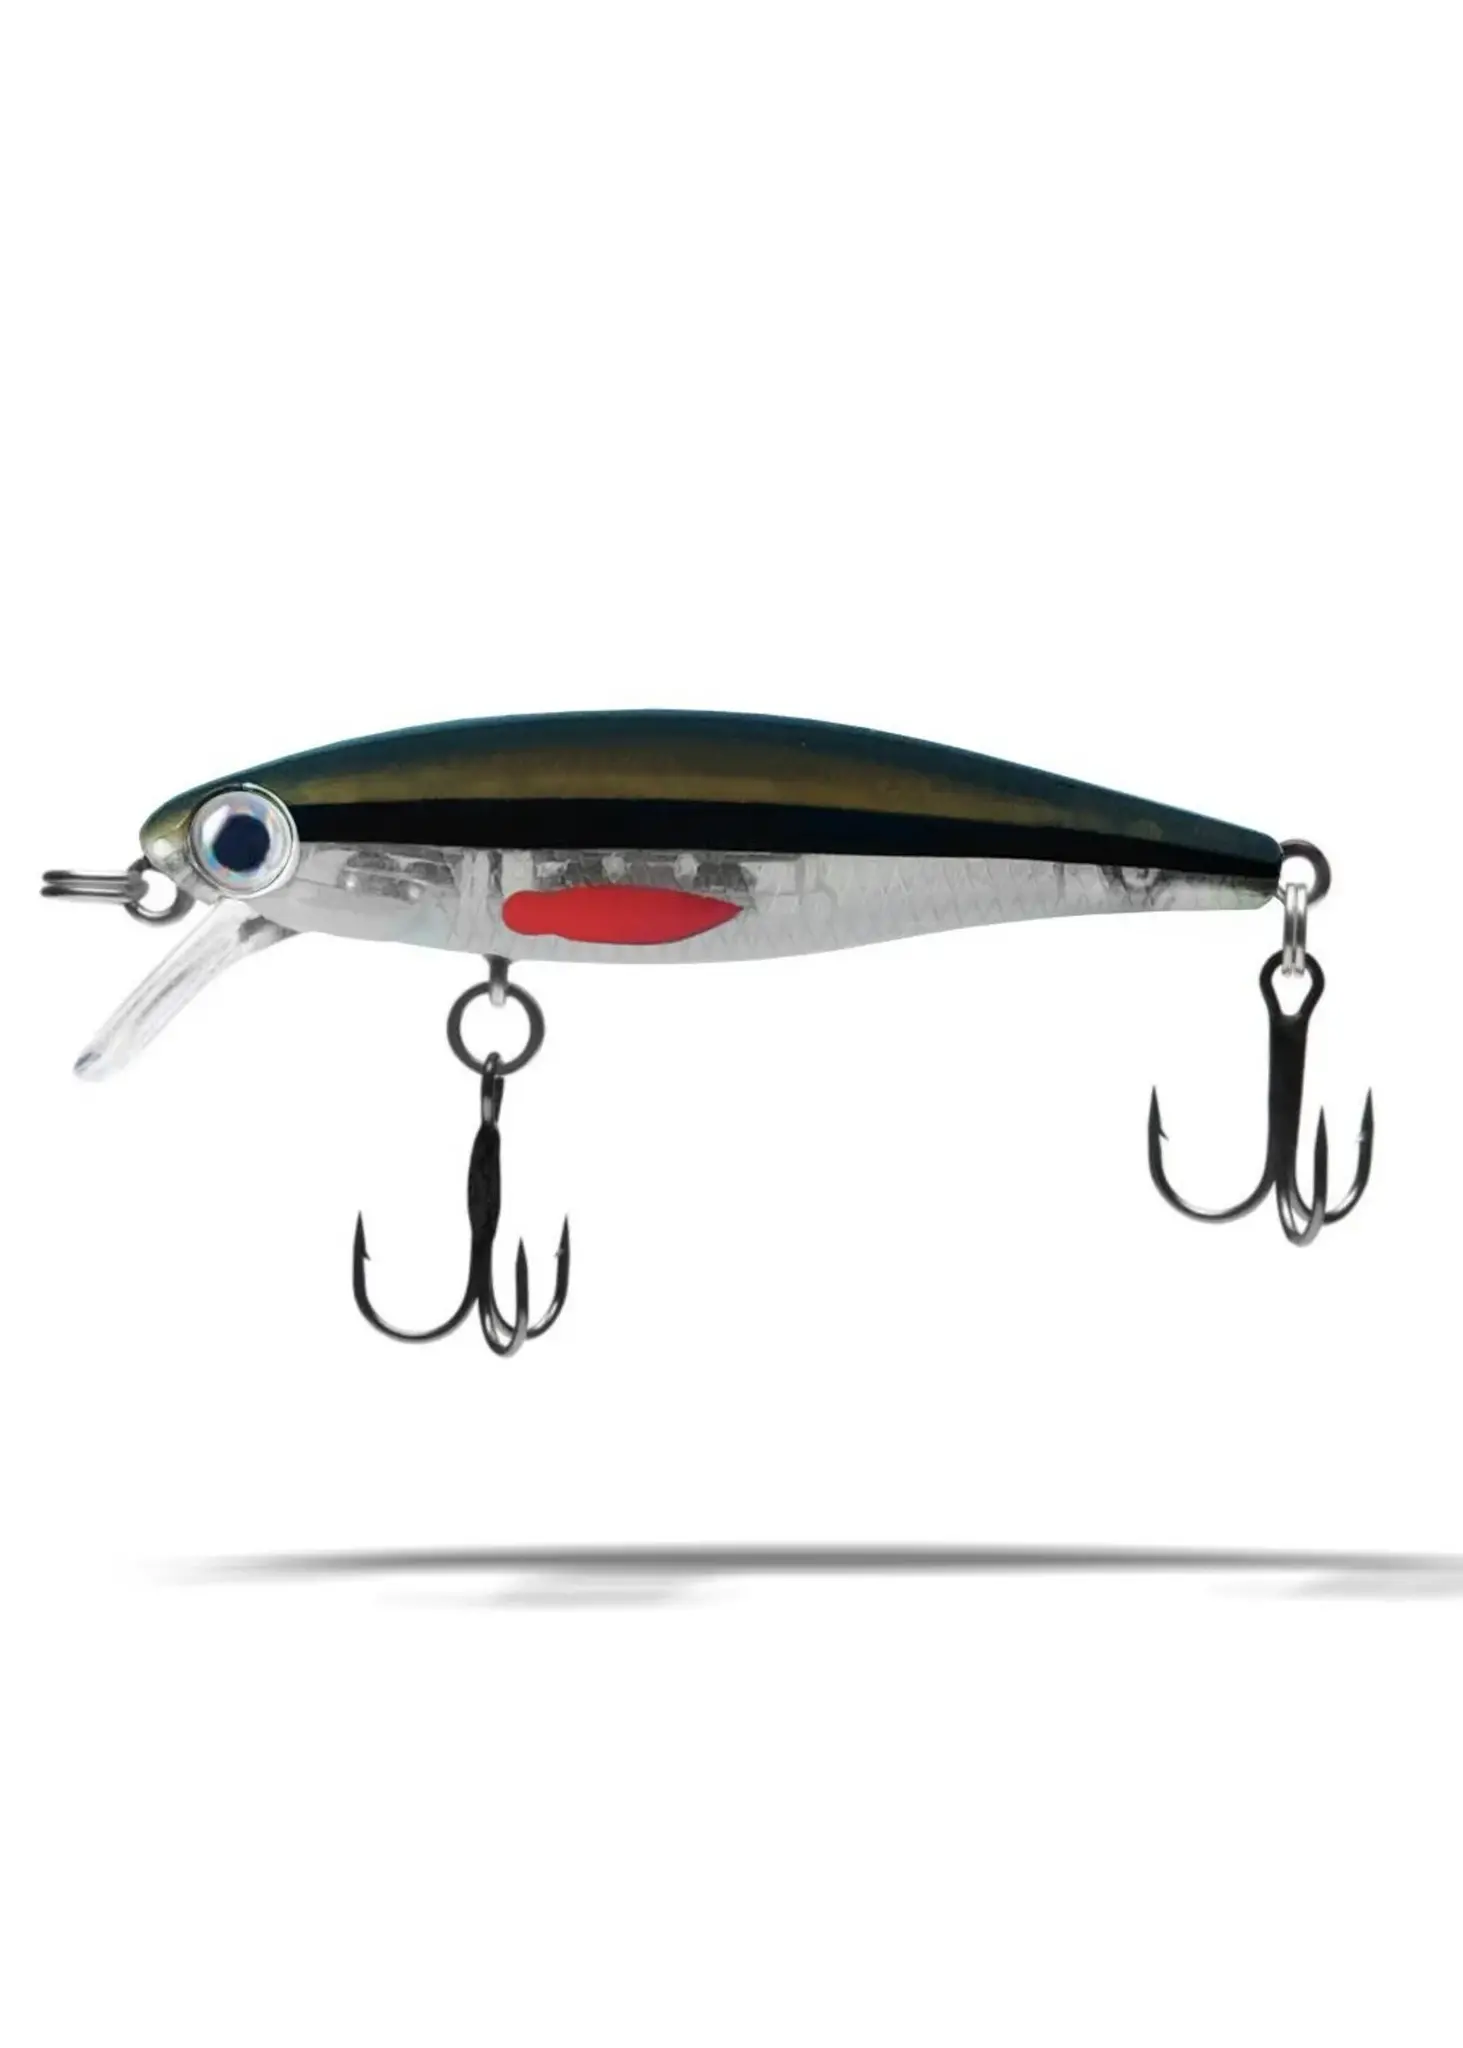 About our fishing lures & tackles